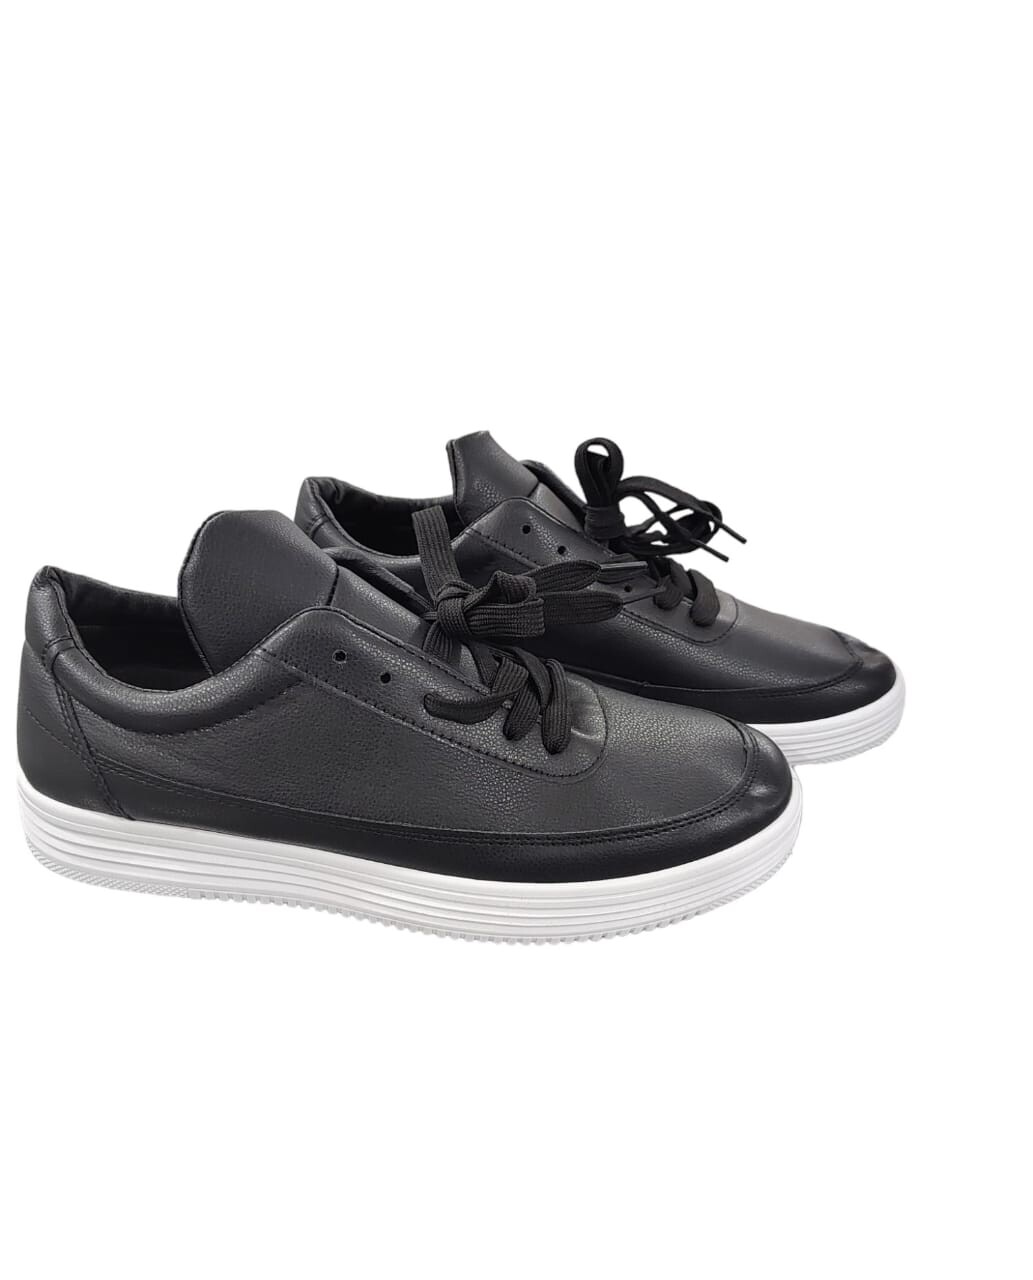 Pure leather Casual sneakers | Black and white